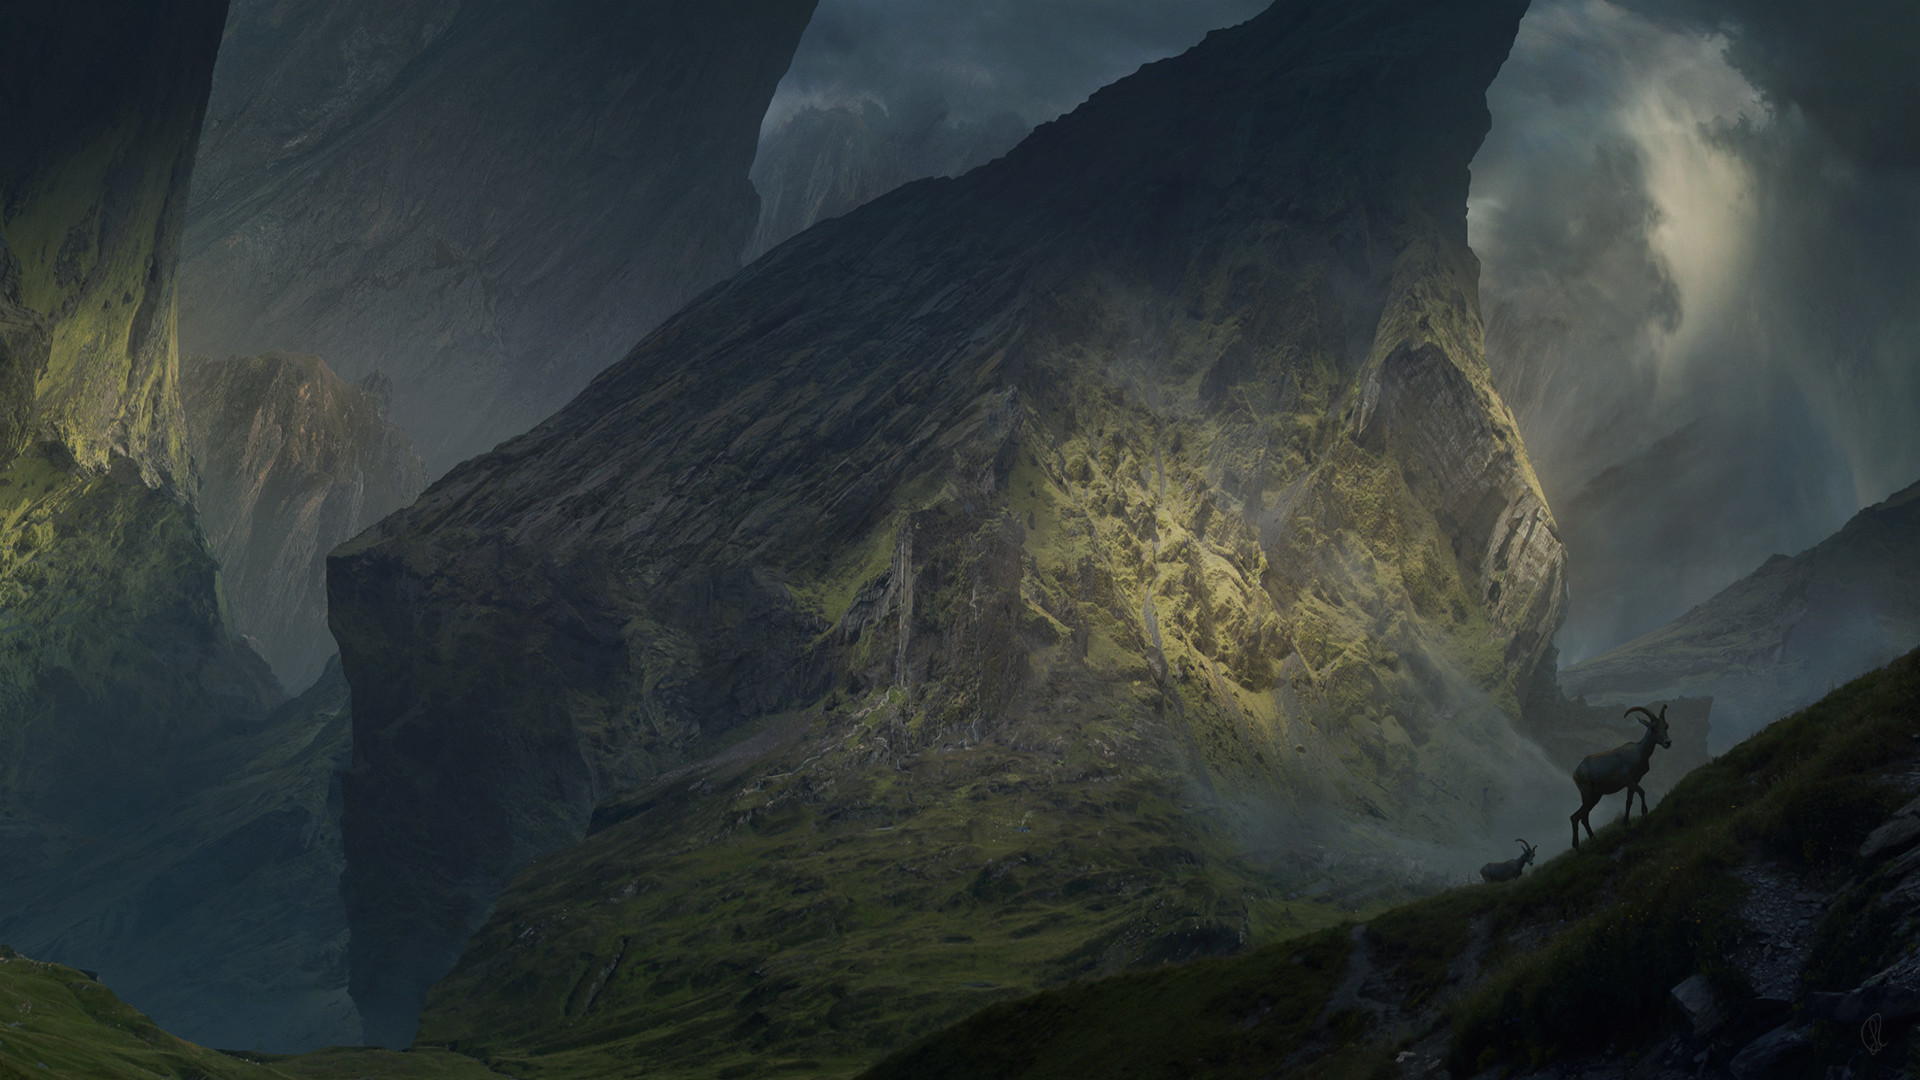 Where the sleeping giants are by Jessica Rossier